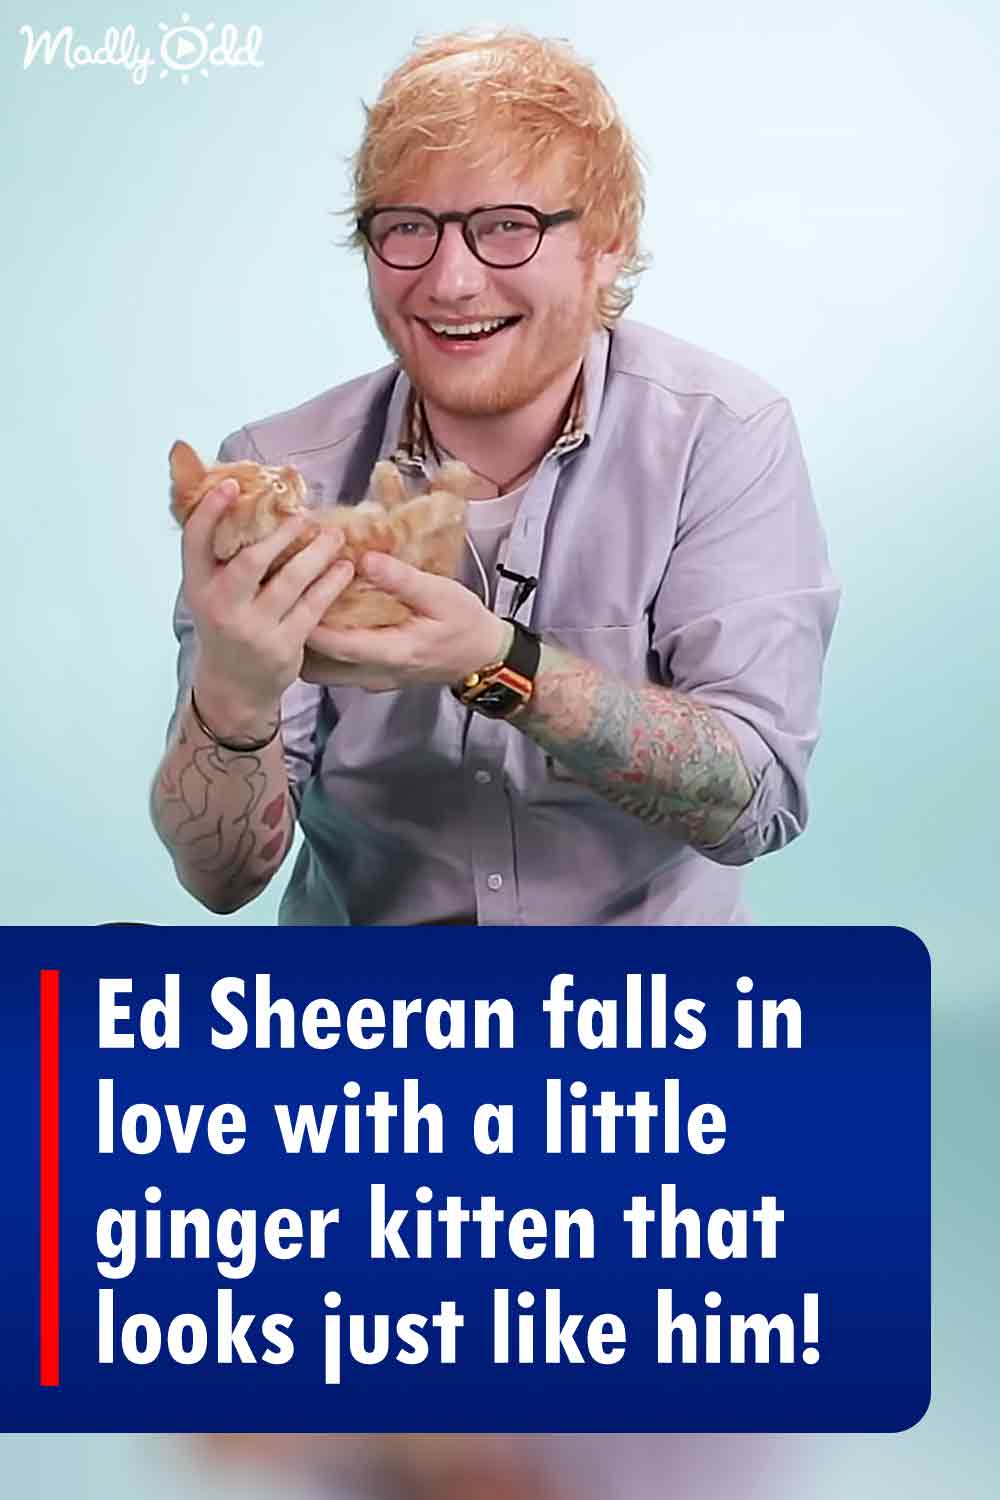 Ed Sheeran falls in love with a little ginger kitten that looks just like him!